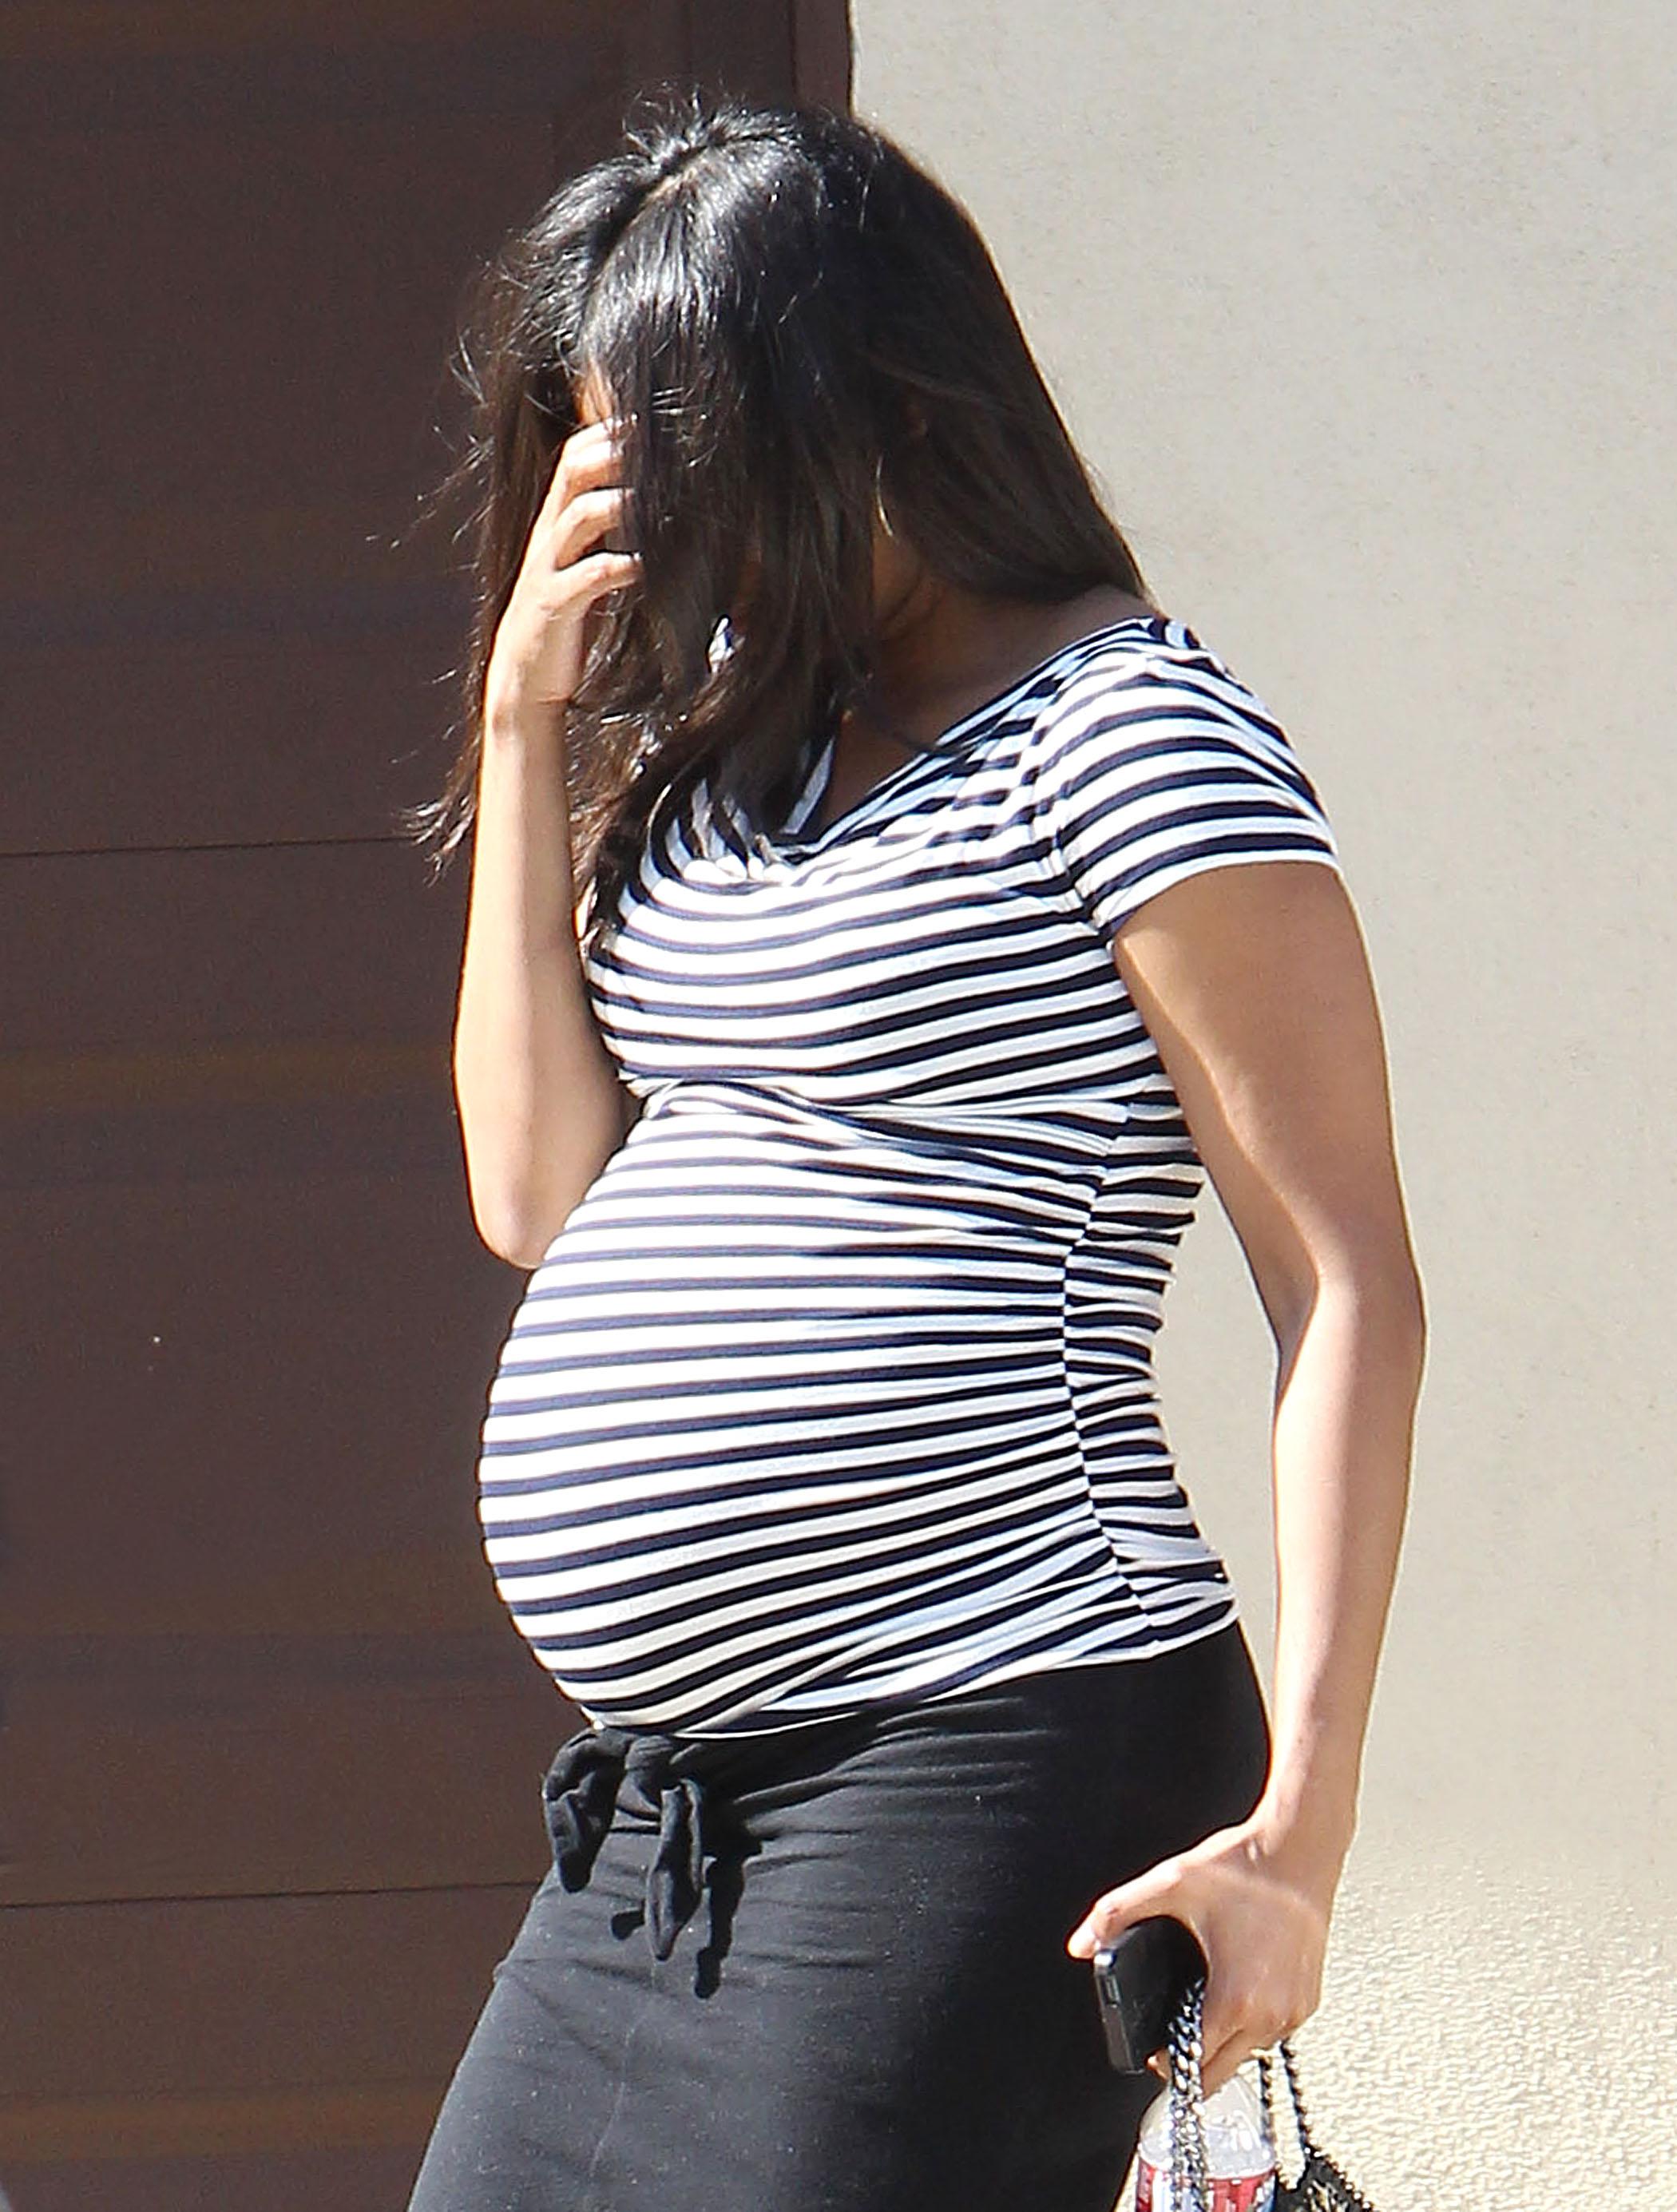 Zoe Saldana Is Very, Very Pregnant! Actress Shows Off Baby Bump While House Hunting